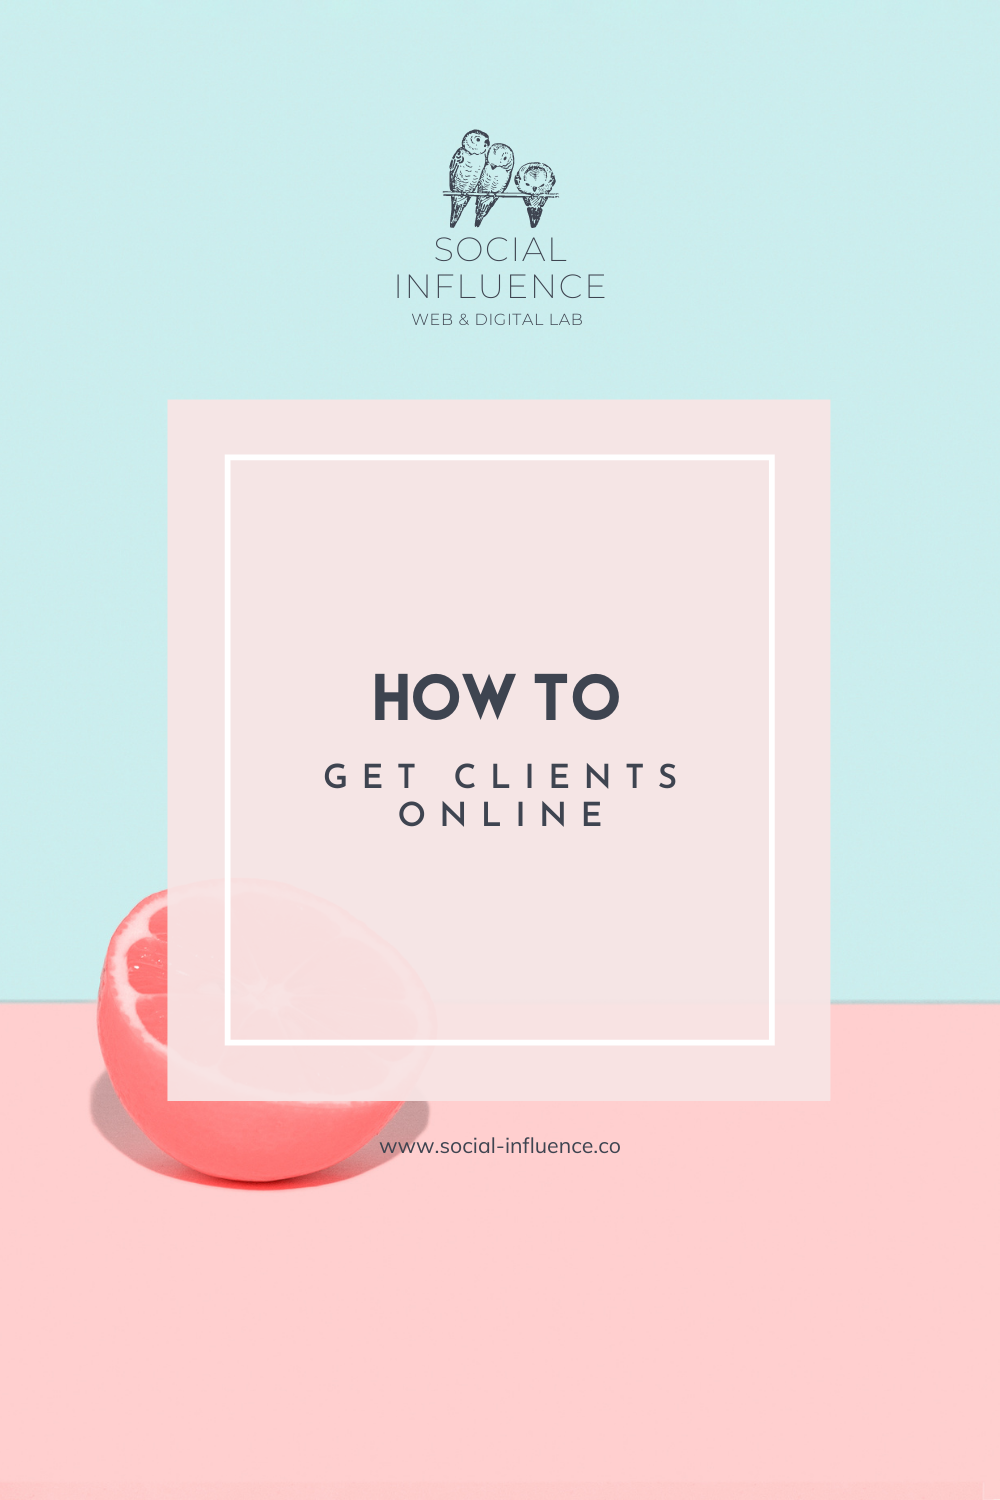 how to get clients online written on a pastel pink and green background